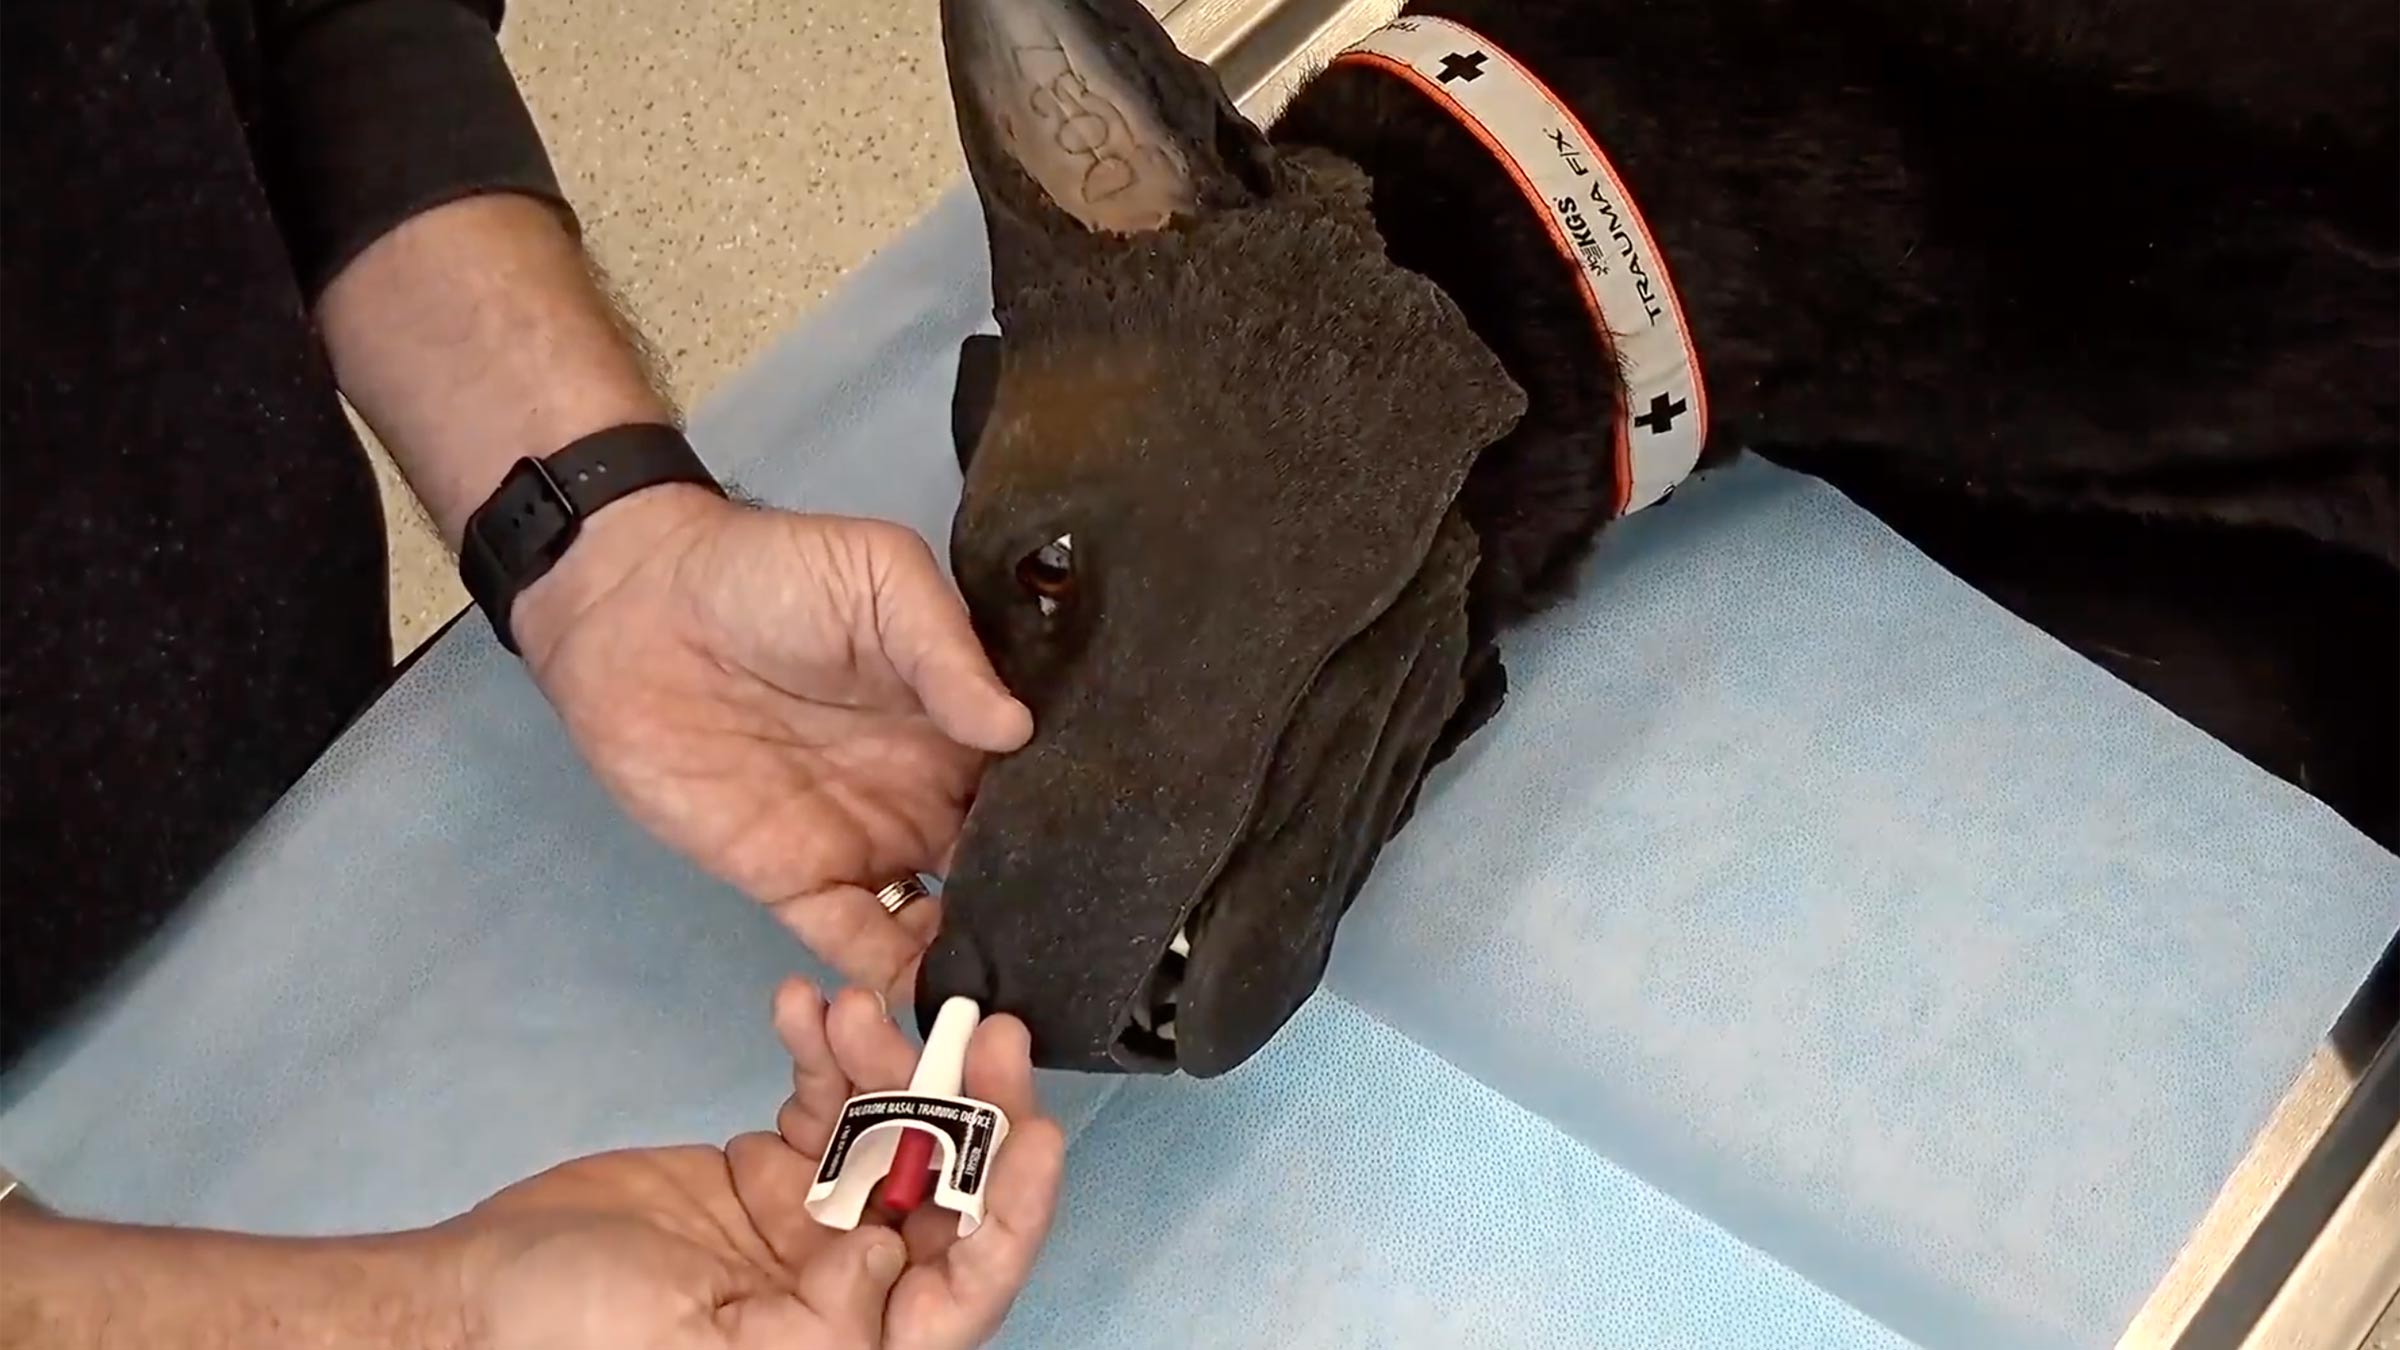 A dog being given Narcan by a veterinarian